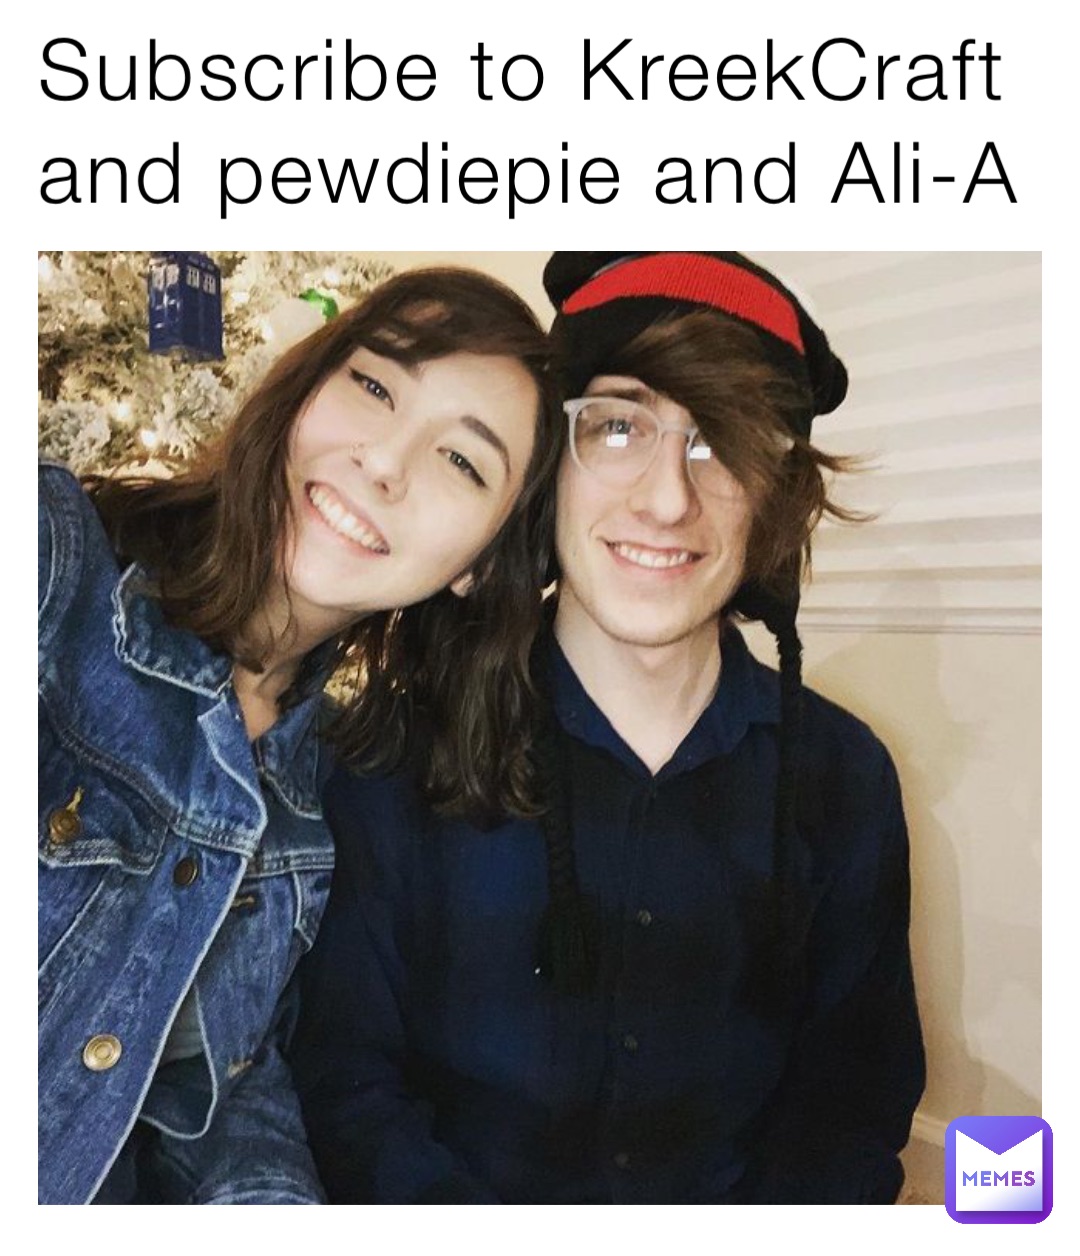 Subscribe to KreekCraft and pewdiepie and Ali-A